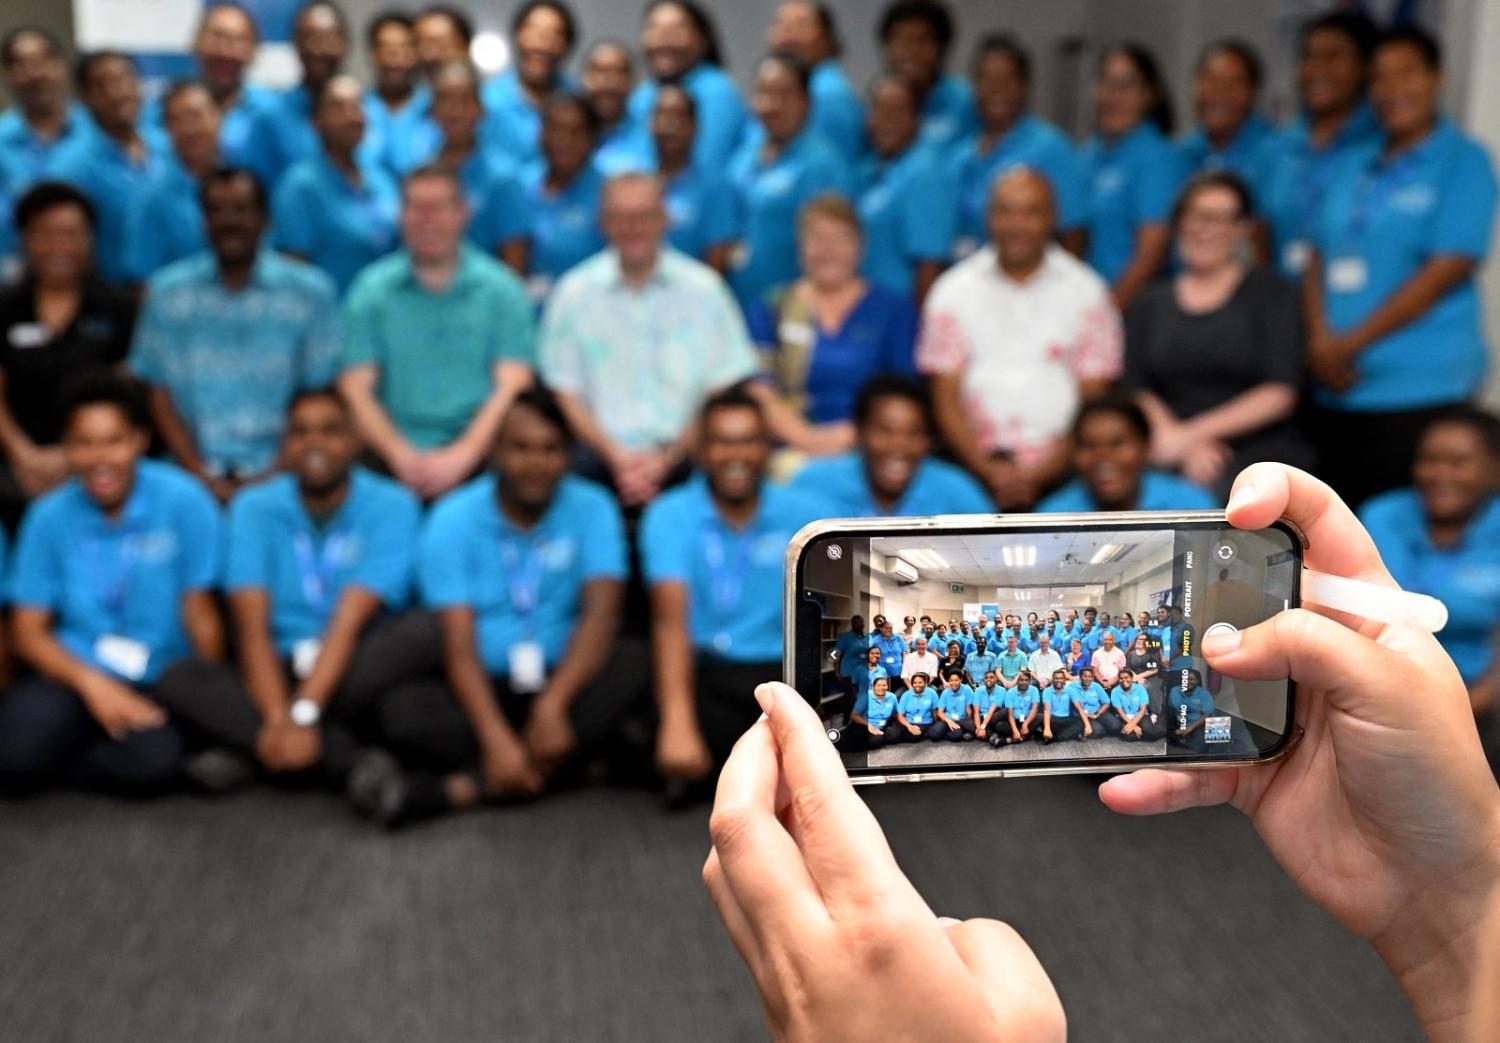 Australian Prime Minister Anthony Albanese poses with staff and students of the Australia Pacific Training Coalition centre after attending the Pacific Islands Forum in Suva on 15 July 2022 (William West/AFP via Getty Images)